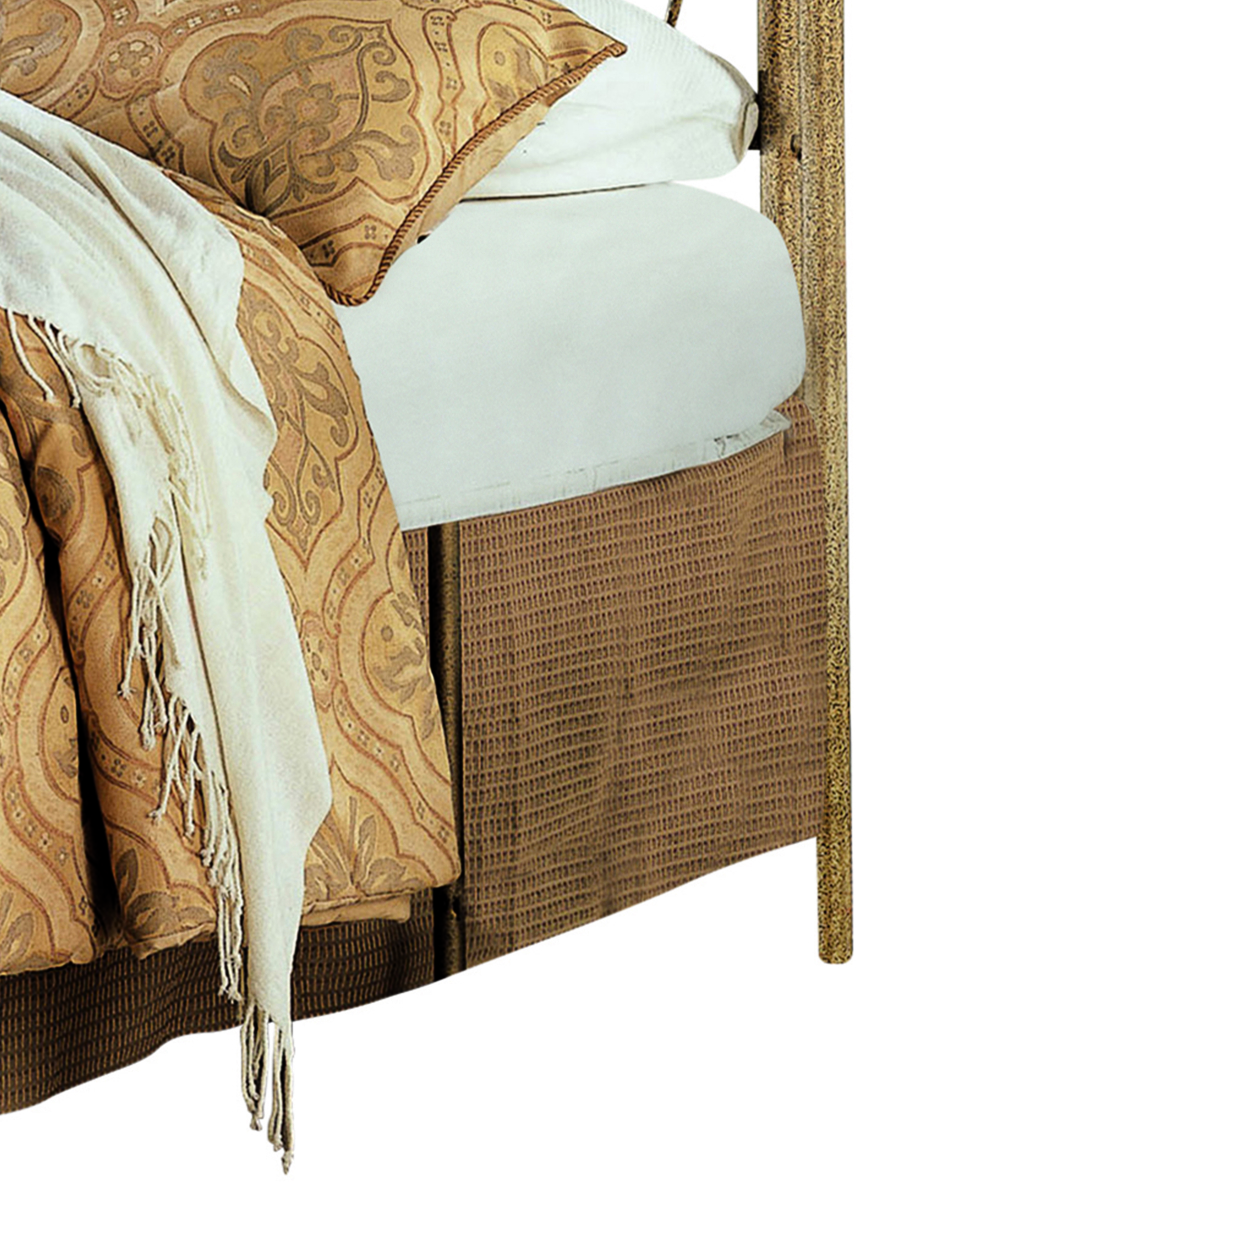 Metal Queen Headboard And Footboard With Swirling Floral Motifs, Antique Gold- Saltoro Sherpi